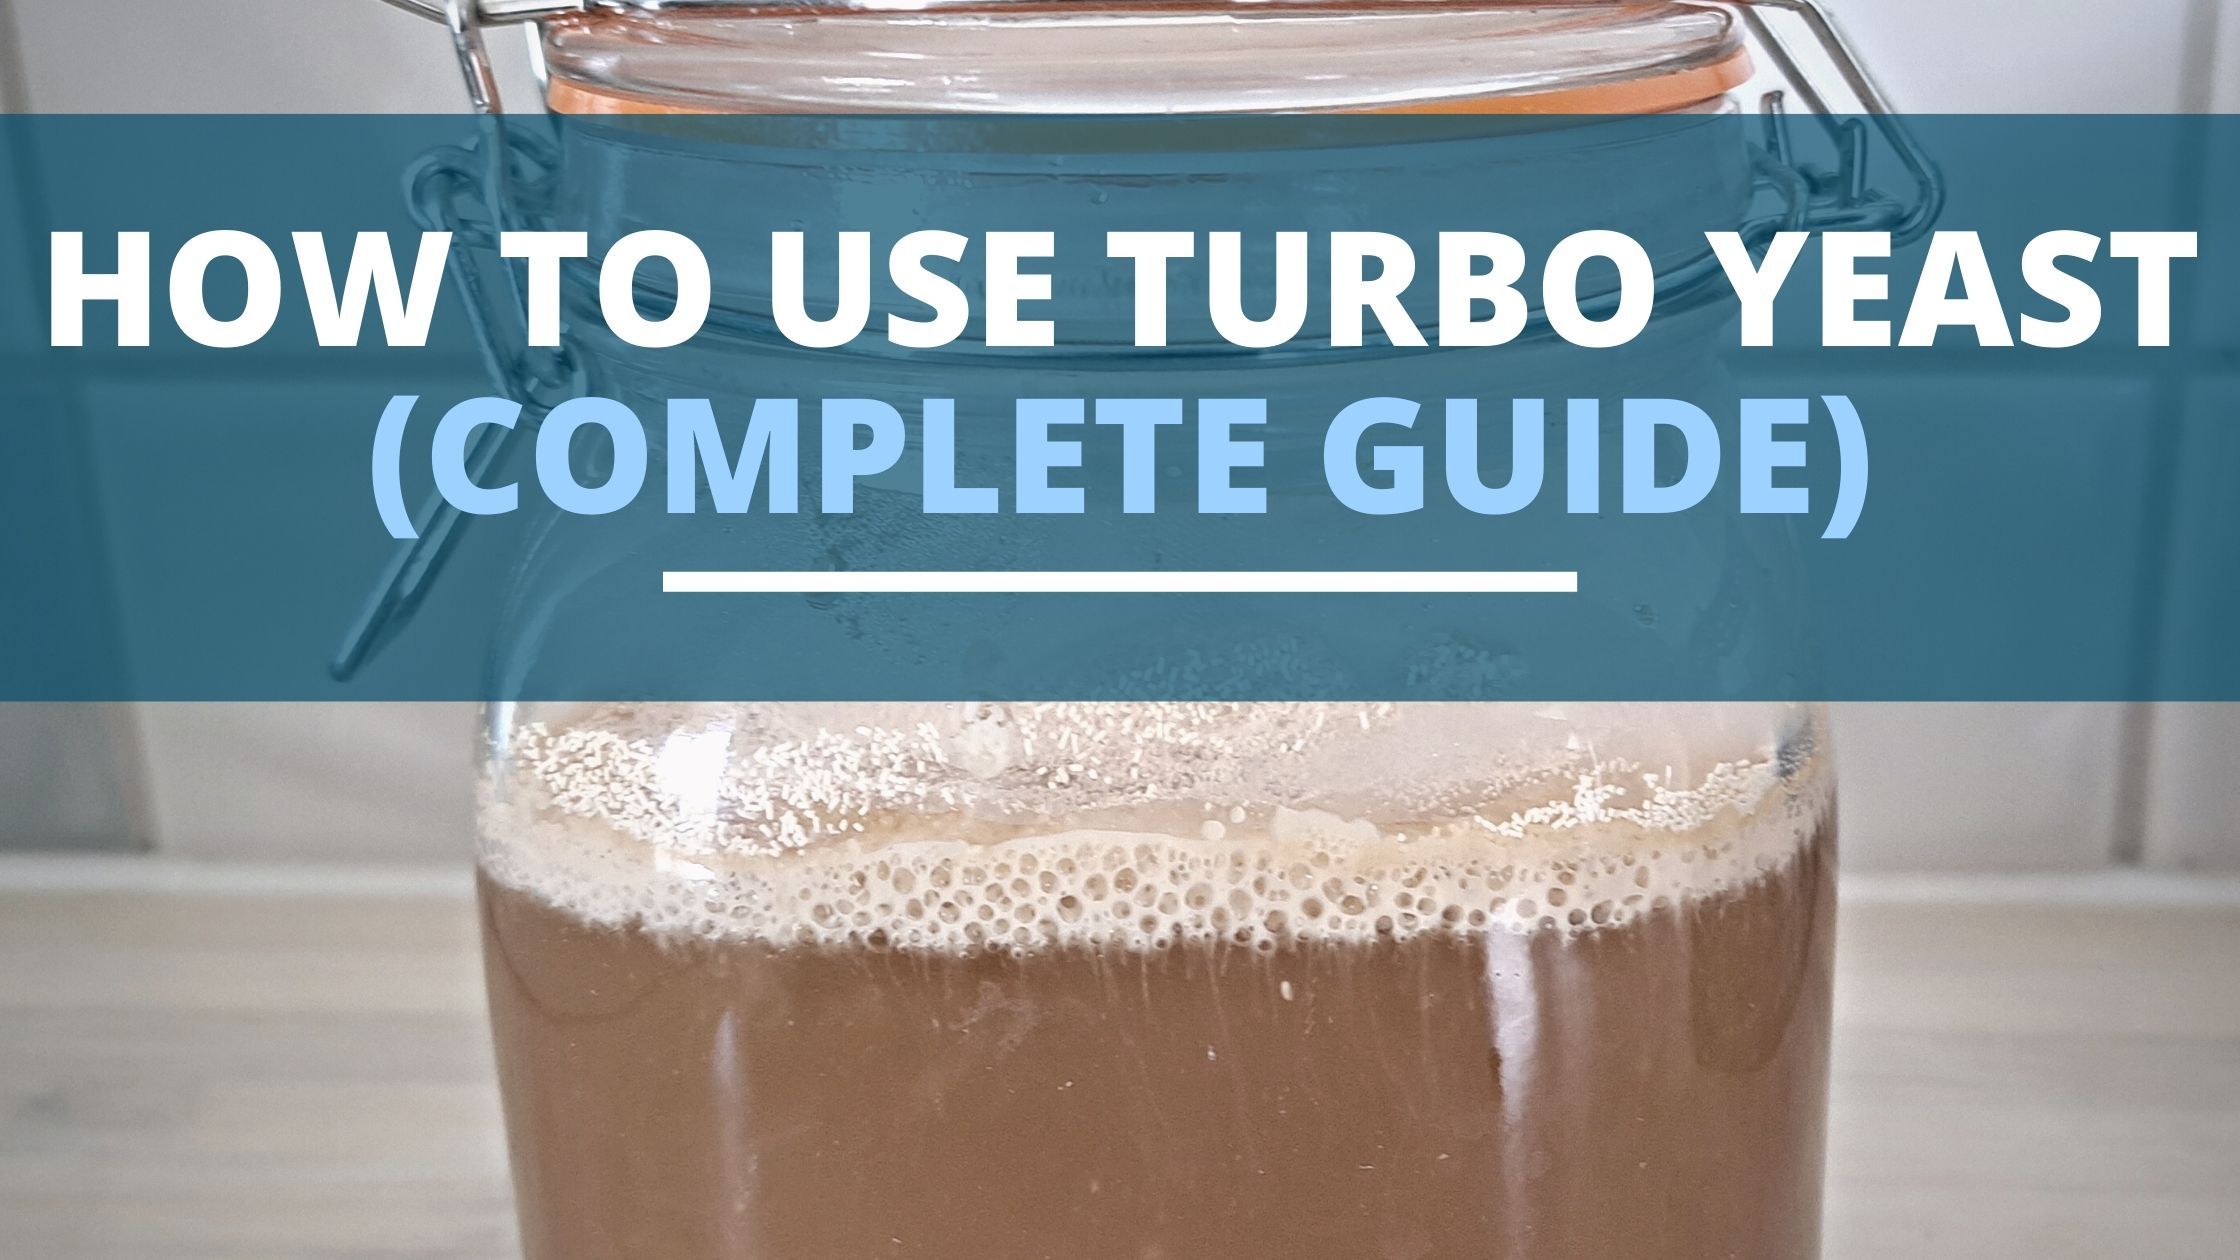 Image of diy distilling how to use turbo yeast complete guide